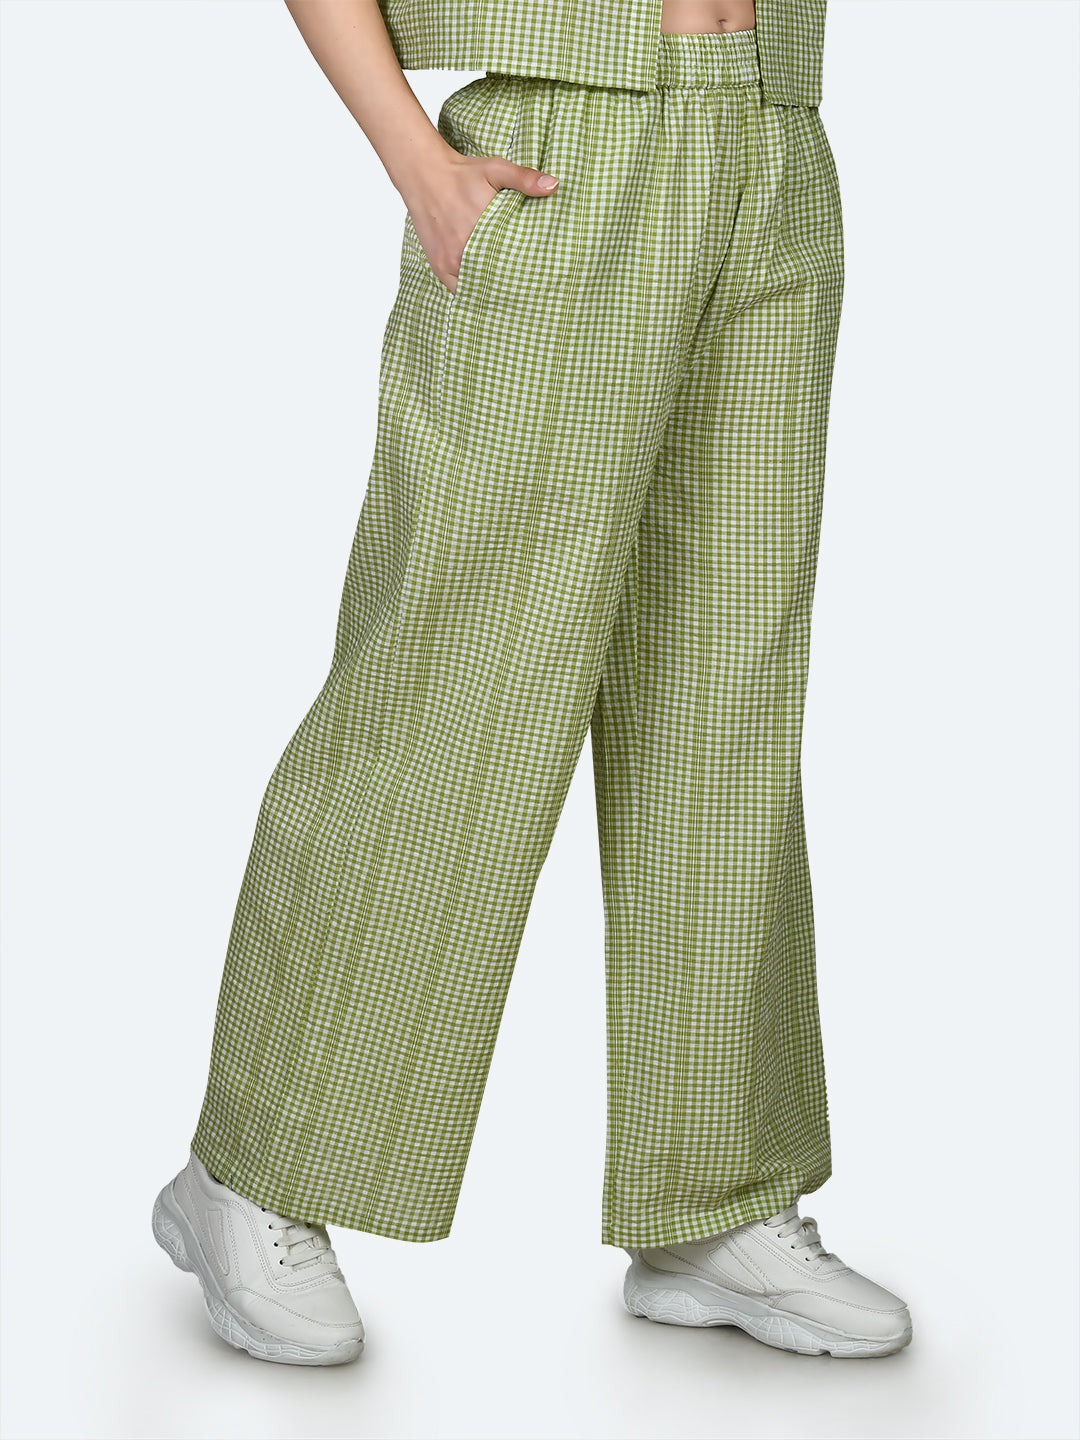 Multicolored Checked Trouser For Women